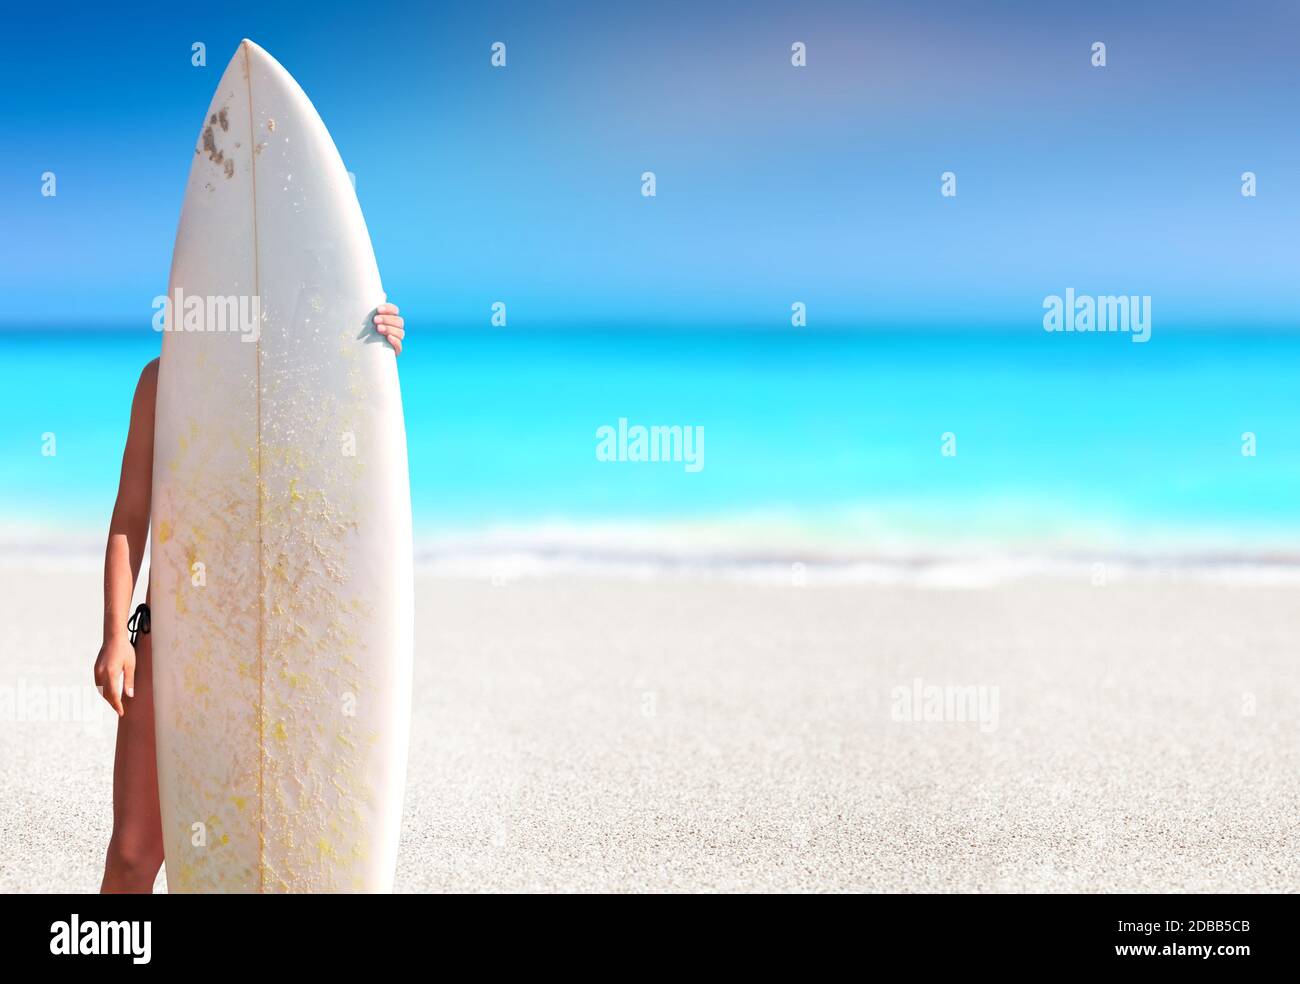 Girl holding a surfboard in a white sand tropical beach Stock Photo